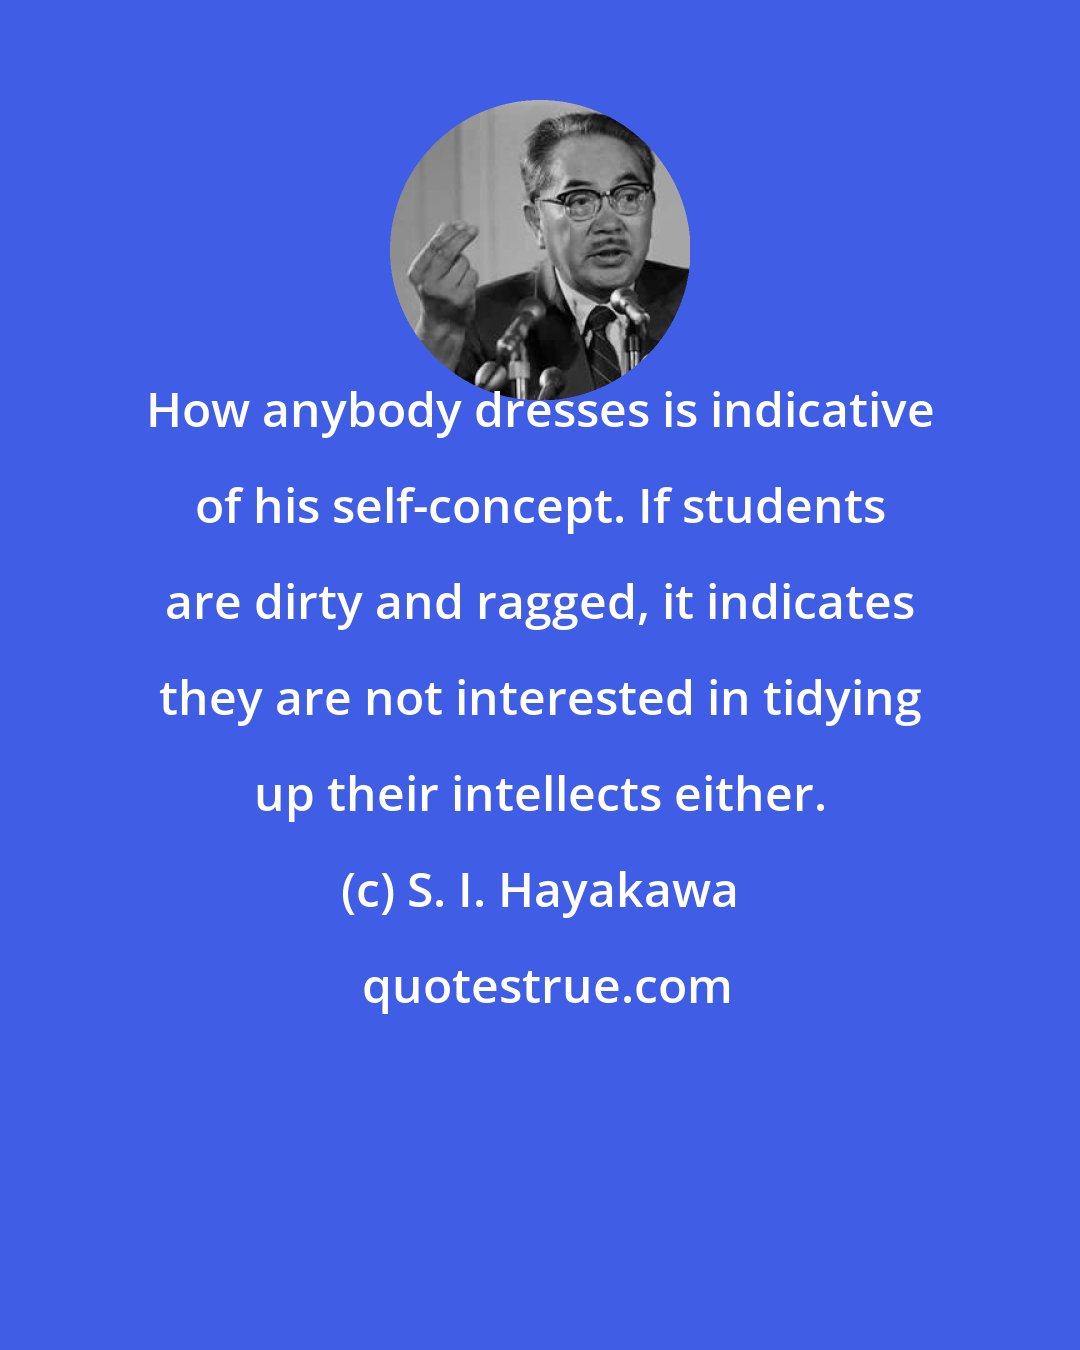 S. I. Hayakawa: How anybody dresses is indicative of his self-concept. If students are dirty and ragged, it indicates they are not interested in tidying up their intellects either.